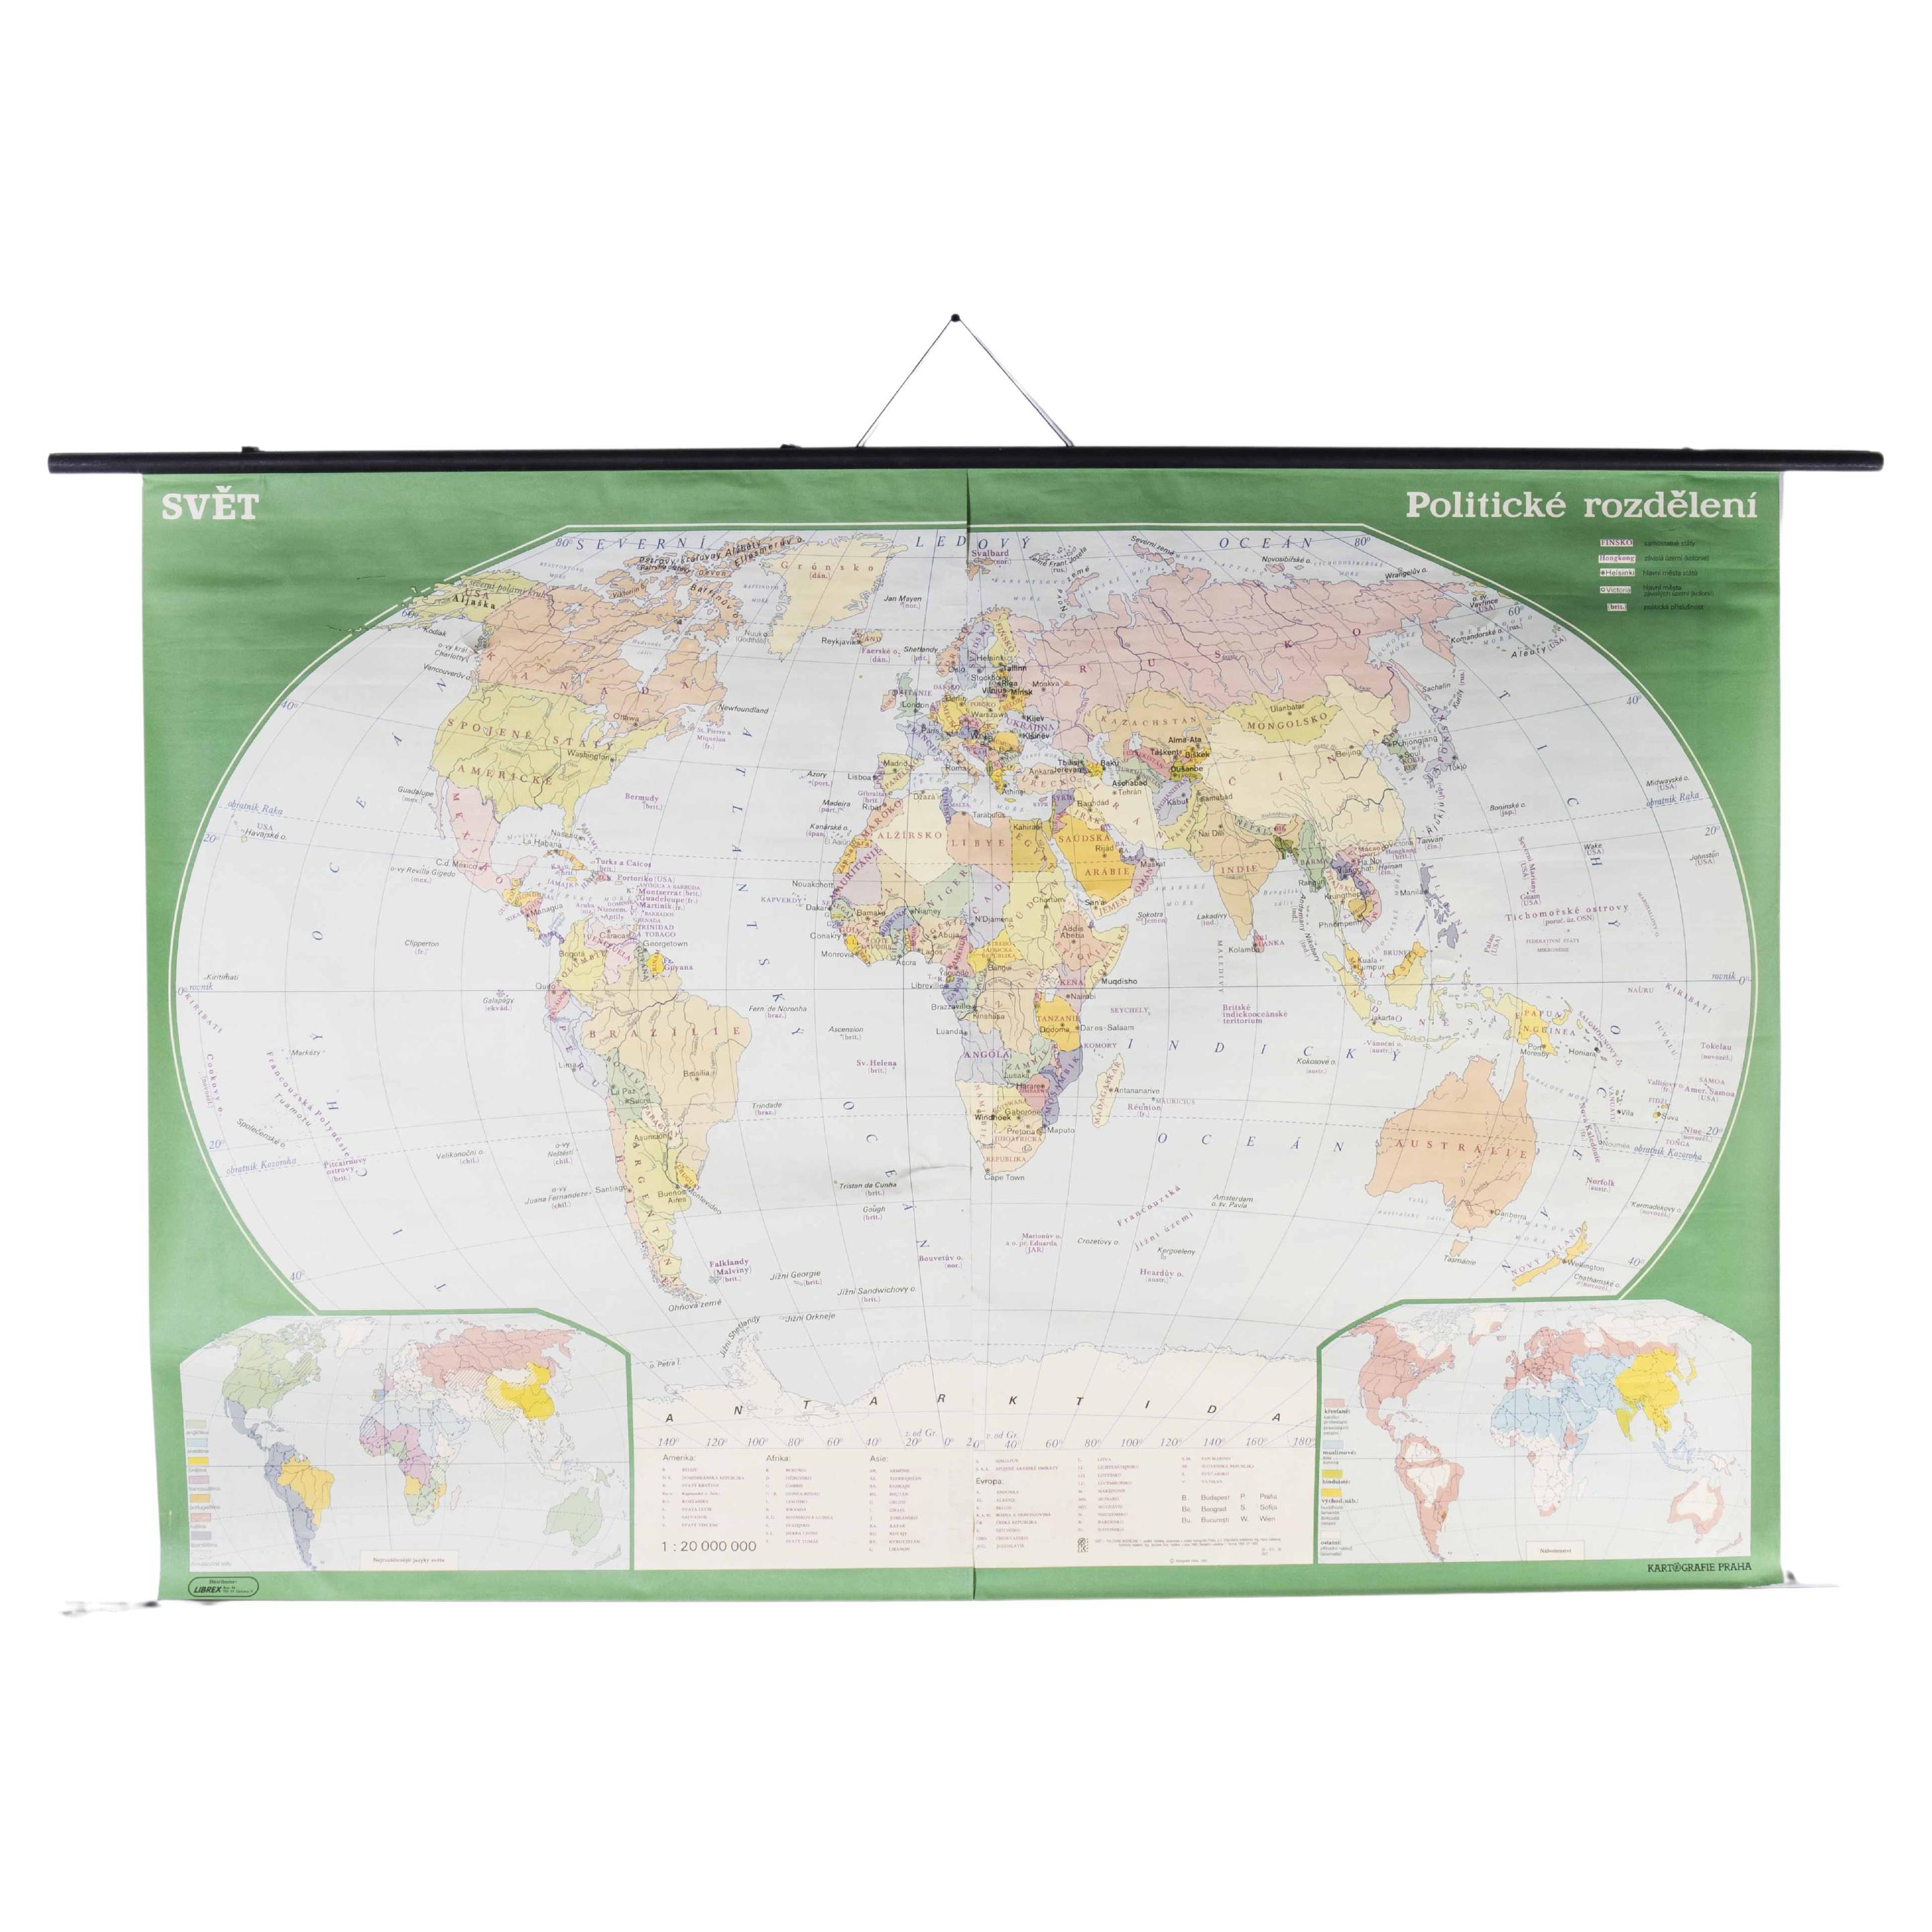 Late 20th Century Educational Geographic Map - World Atlas For Sale